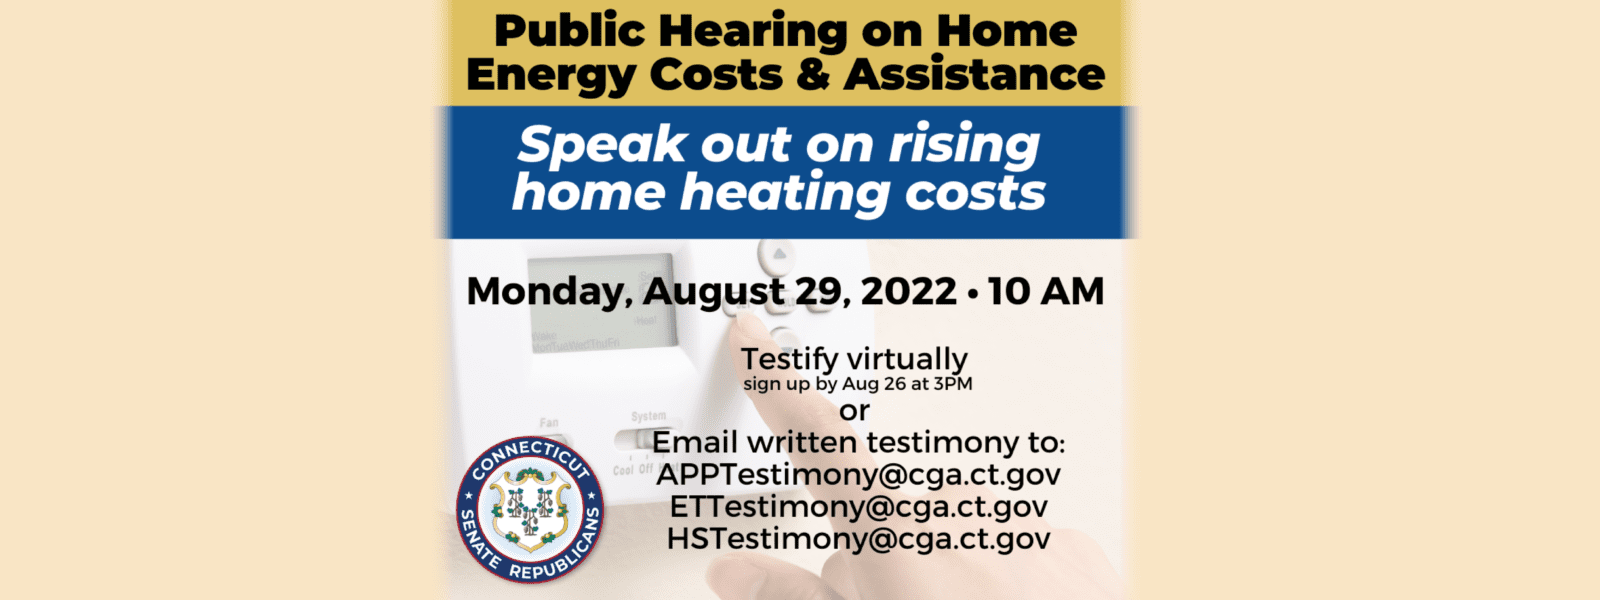 Speak out on rising home energy costs